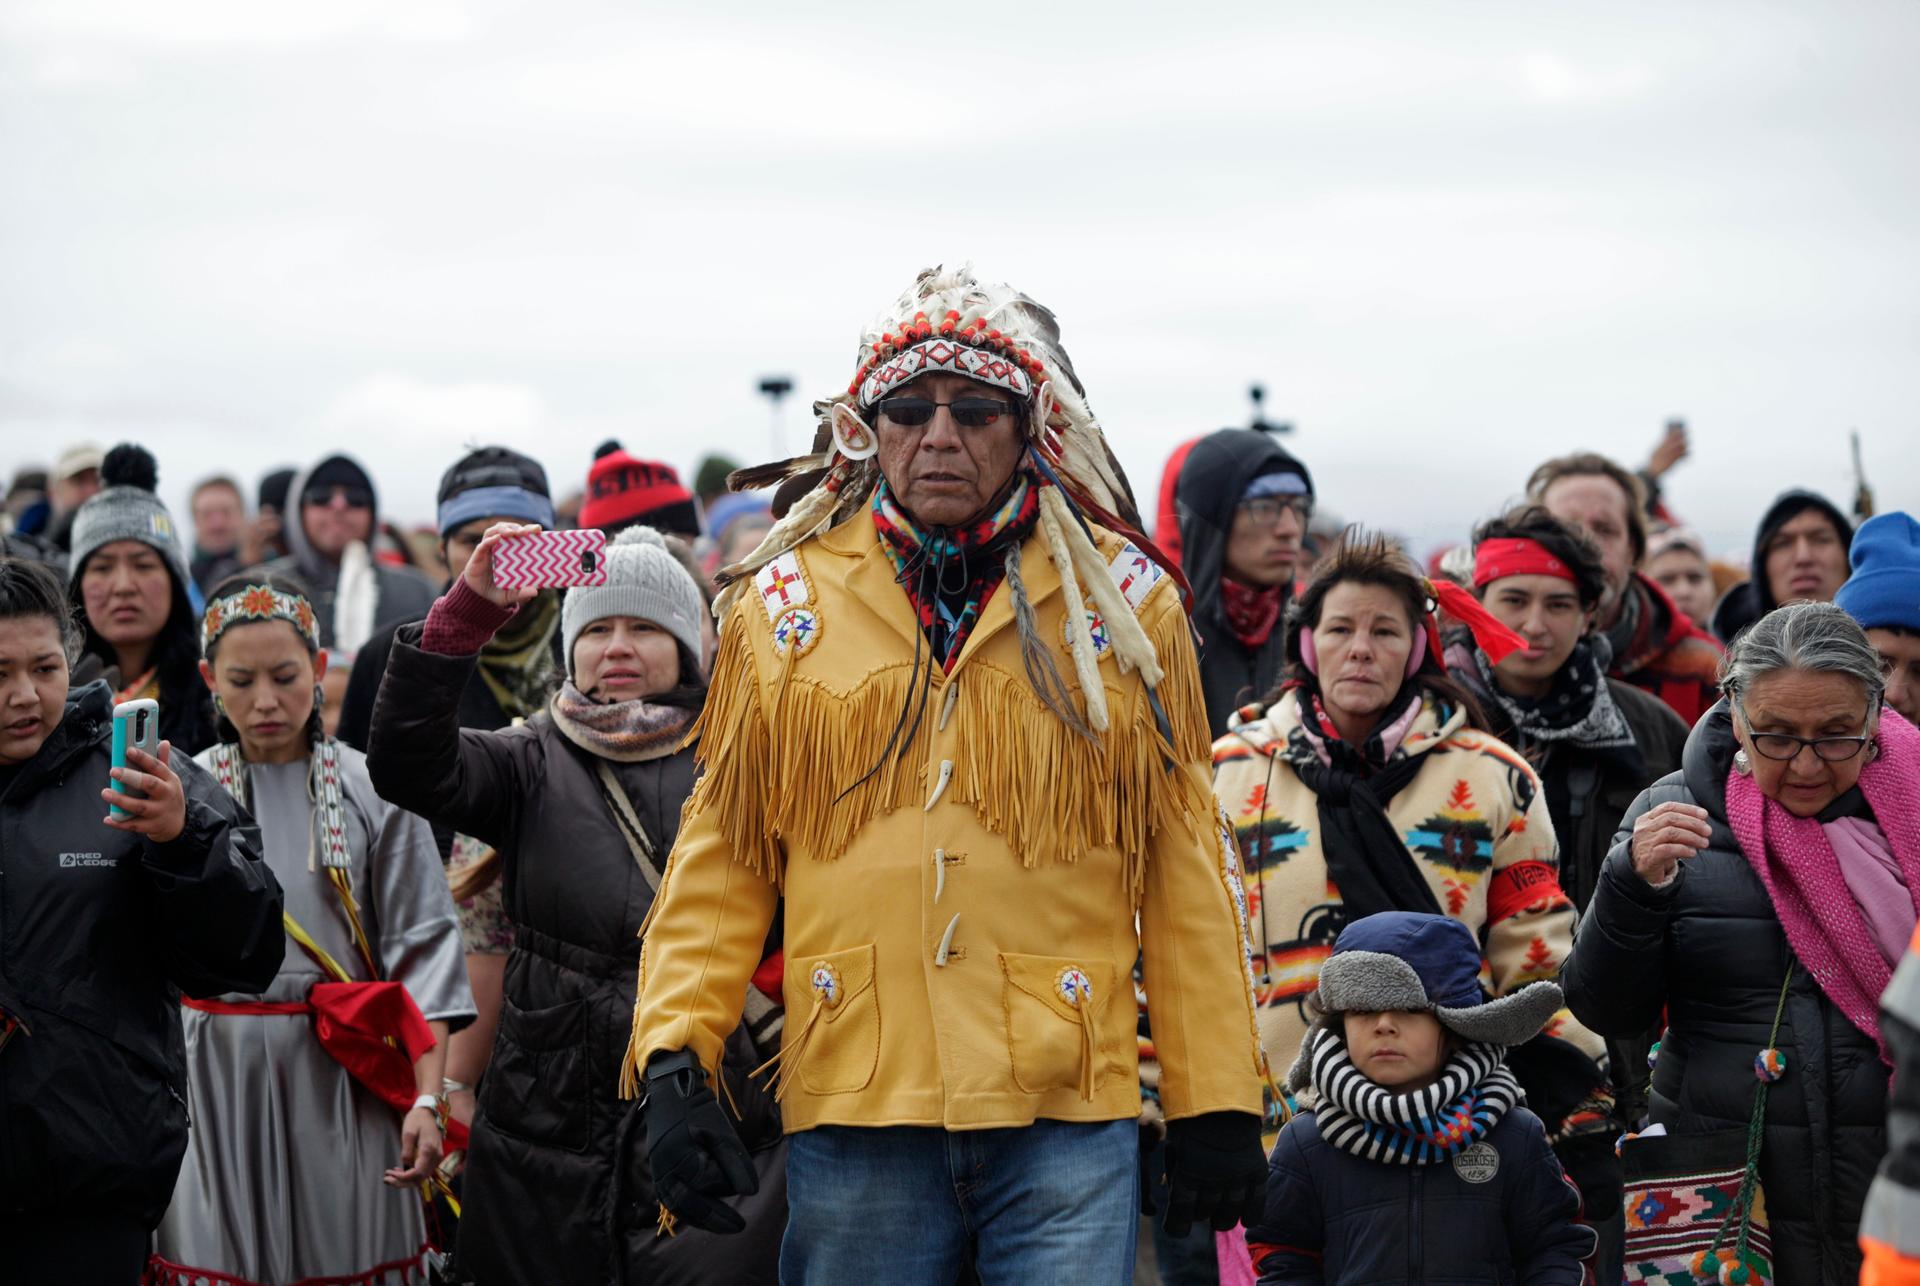 Chief Arvol Looking Horse, spiritual leader of the Sioux Nation, leads his people to peacefully pray near a law enforcement barricade just outside of a Dakota Access pipeline construction site north of Cannon Ball, North Dakota, on Oct. 29, 2016.